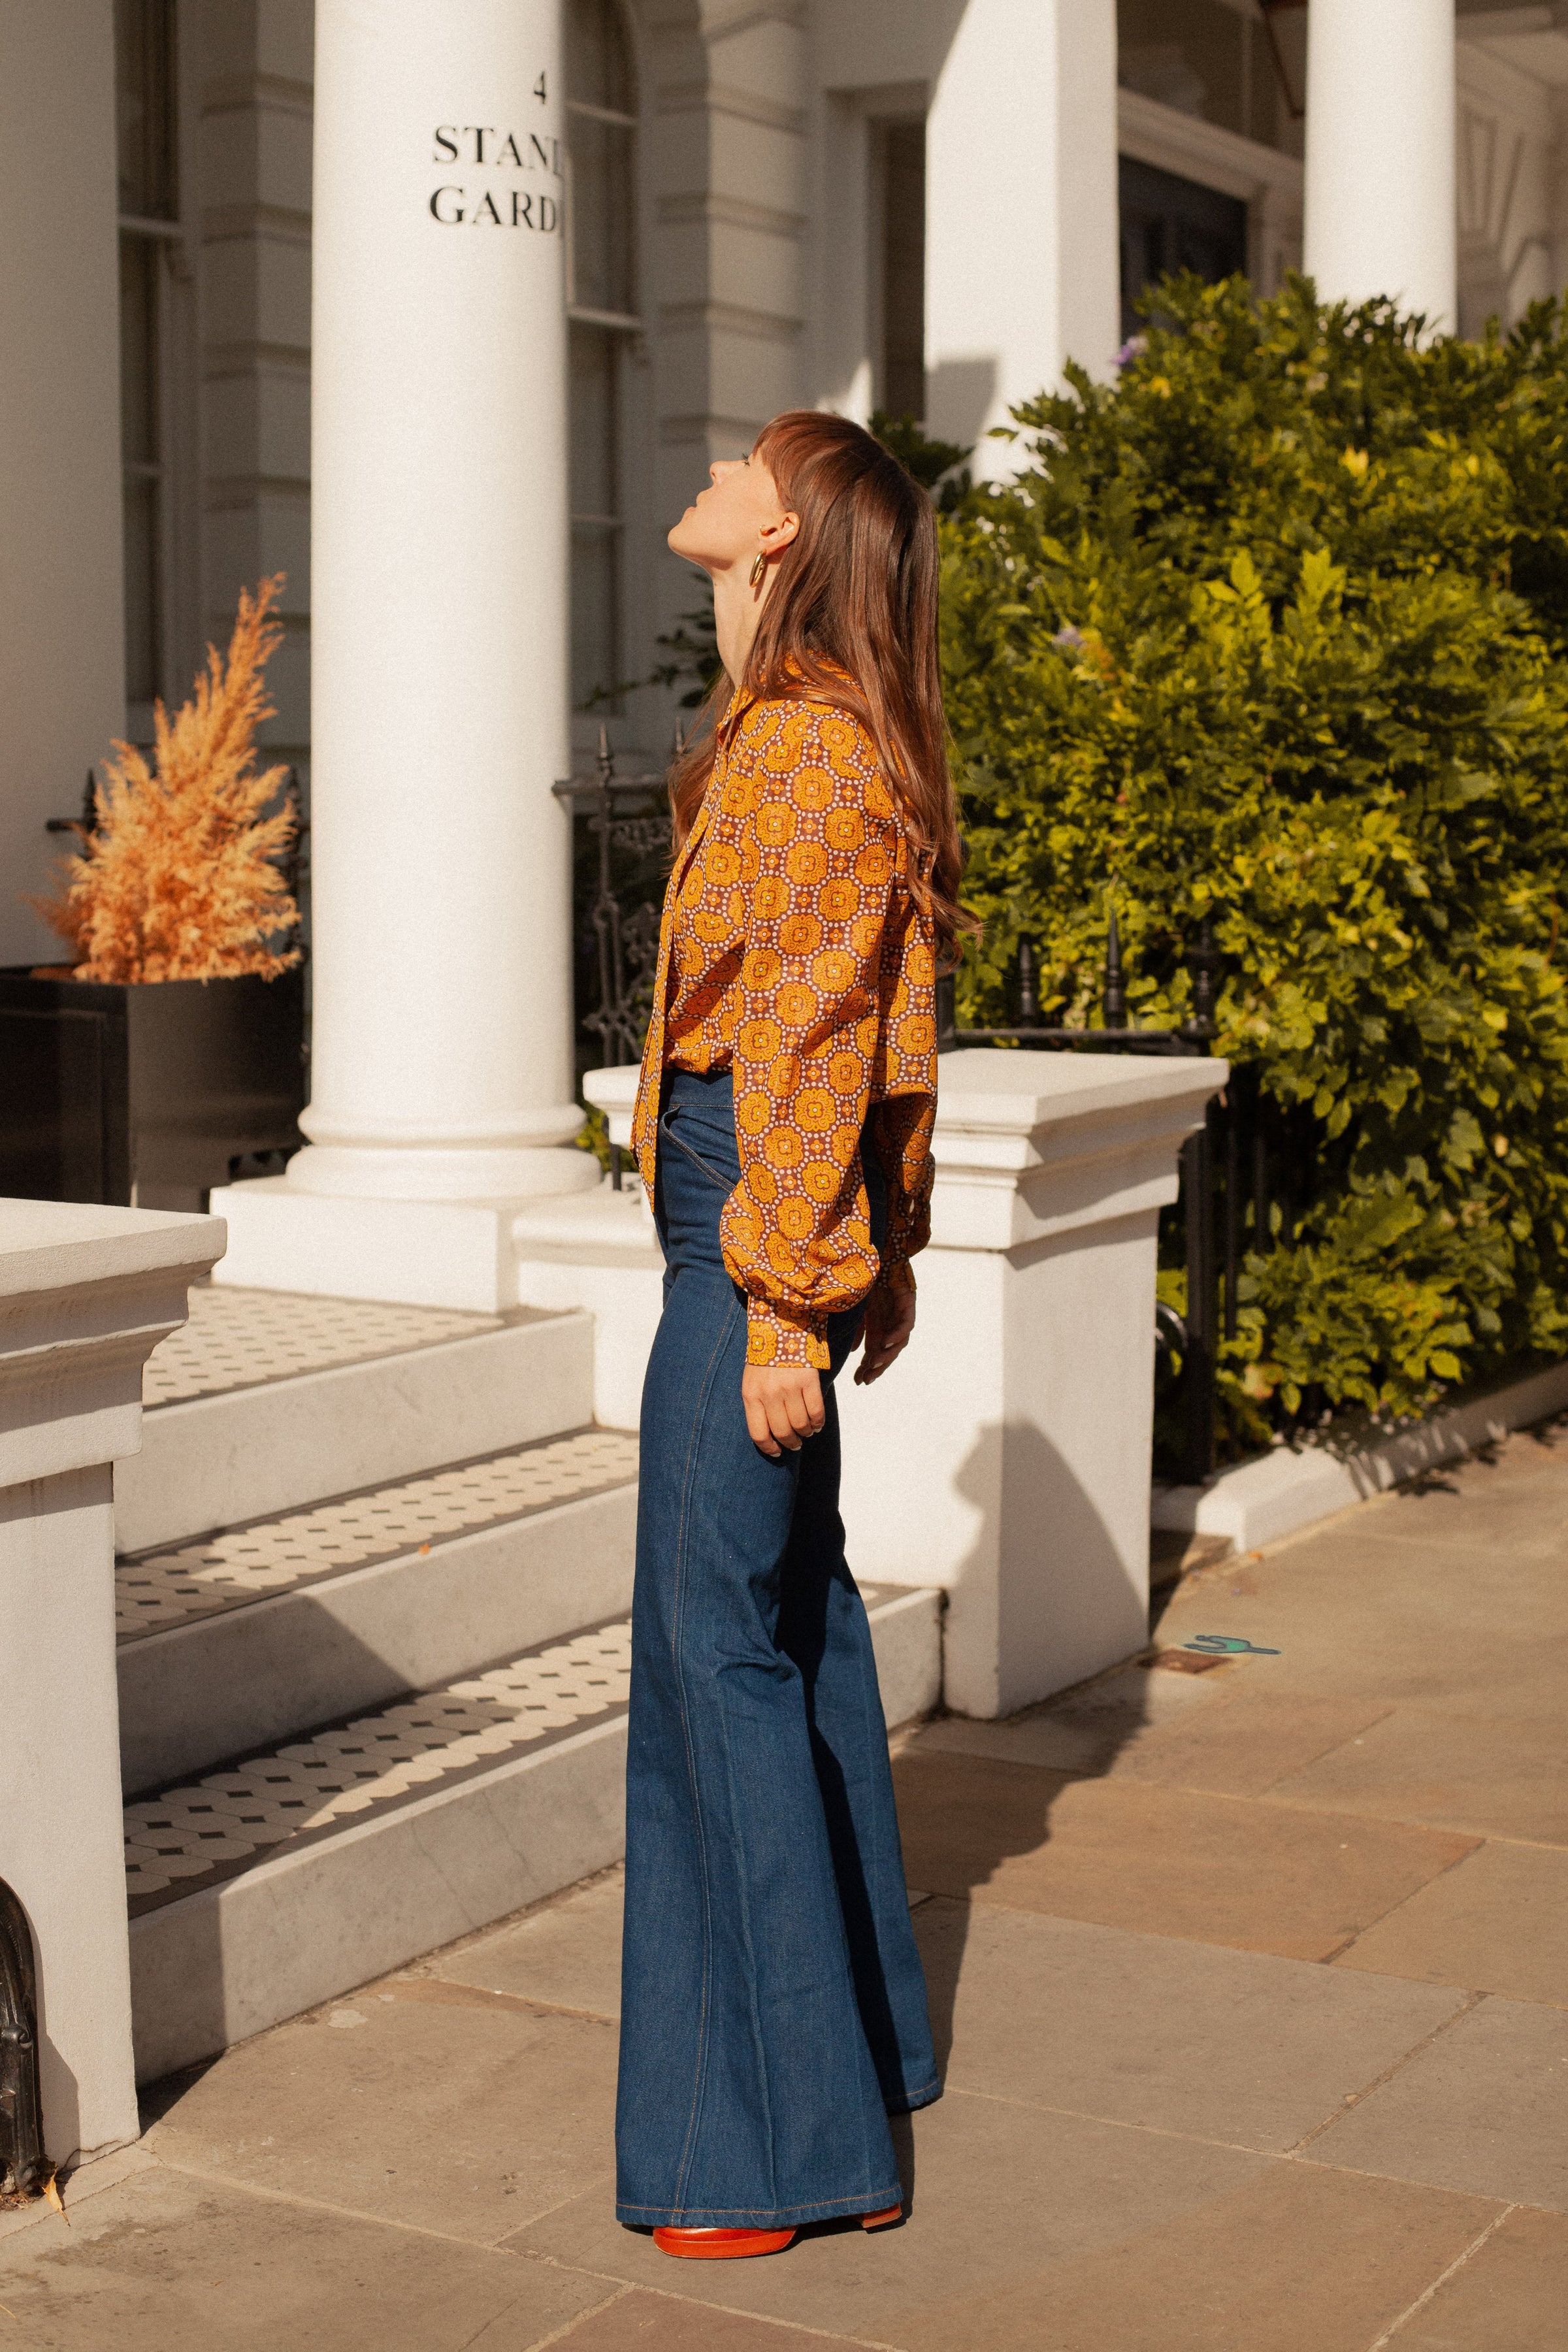 Psychedelic Tall Orange Floral Flared Trousers